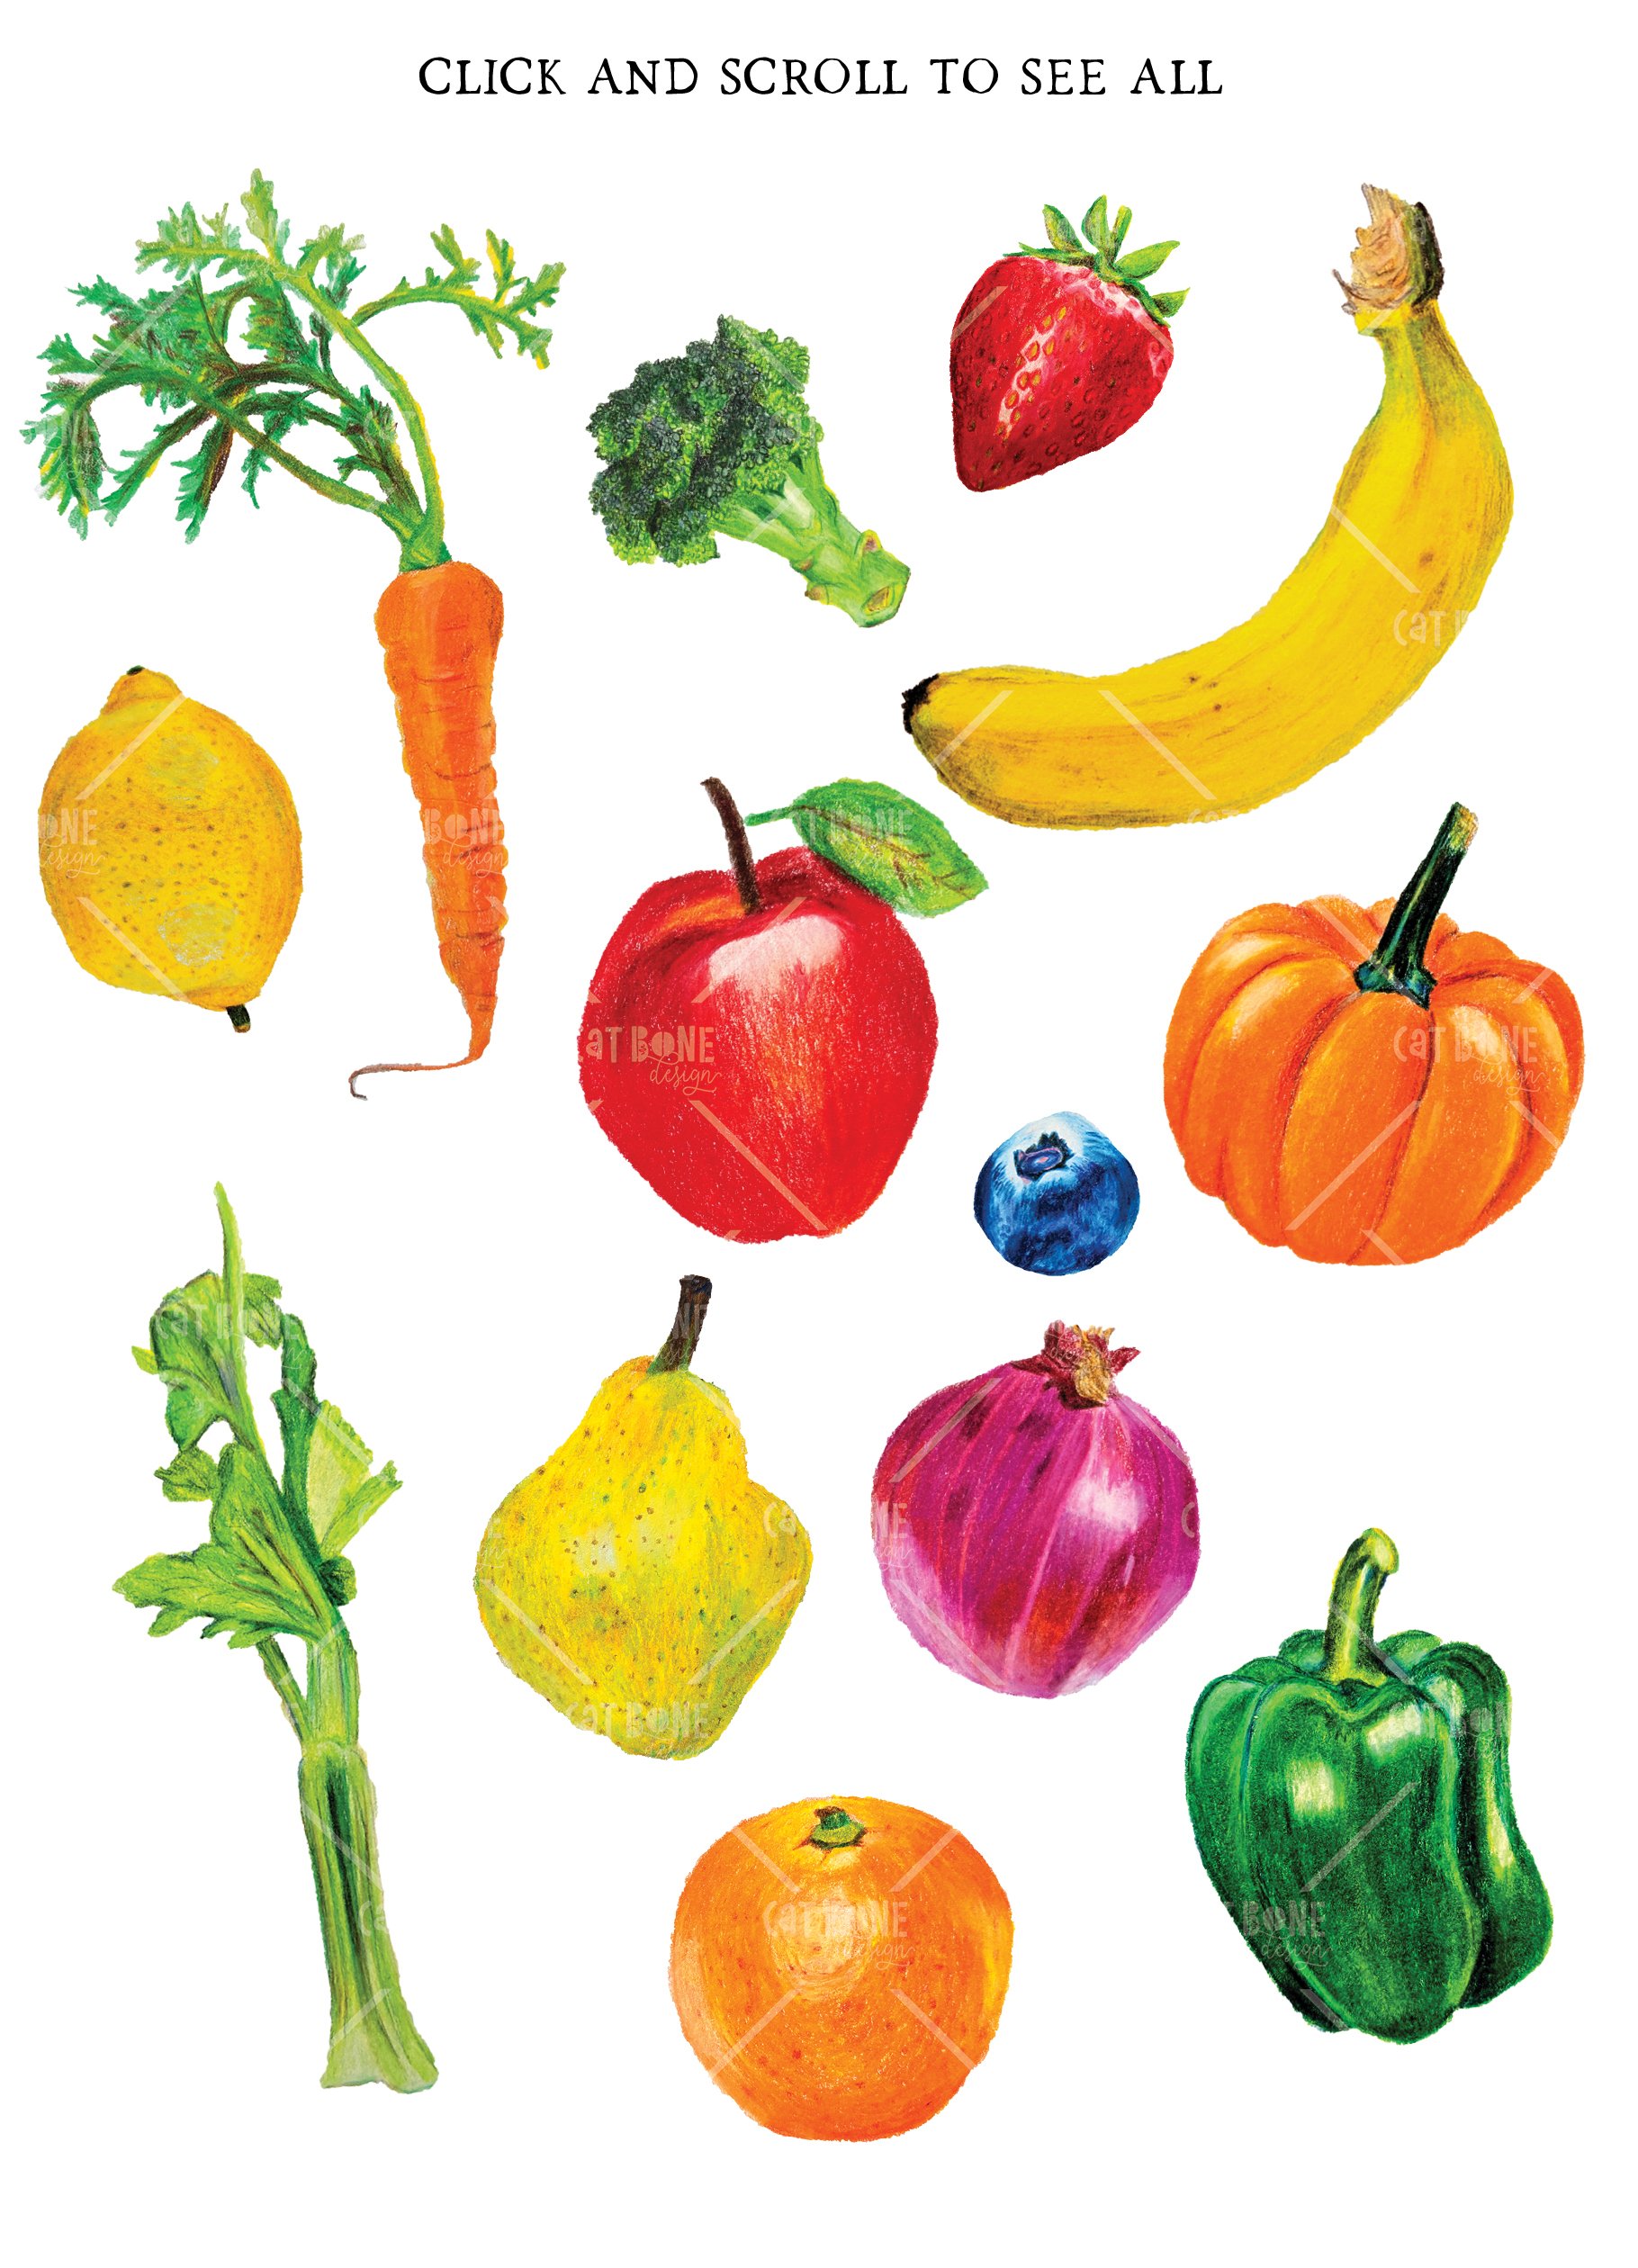 Hand-Drawn Produce preview image.